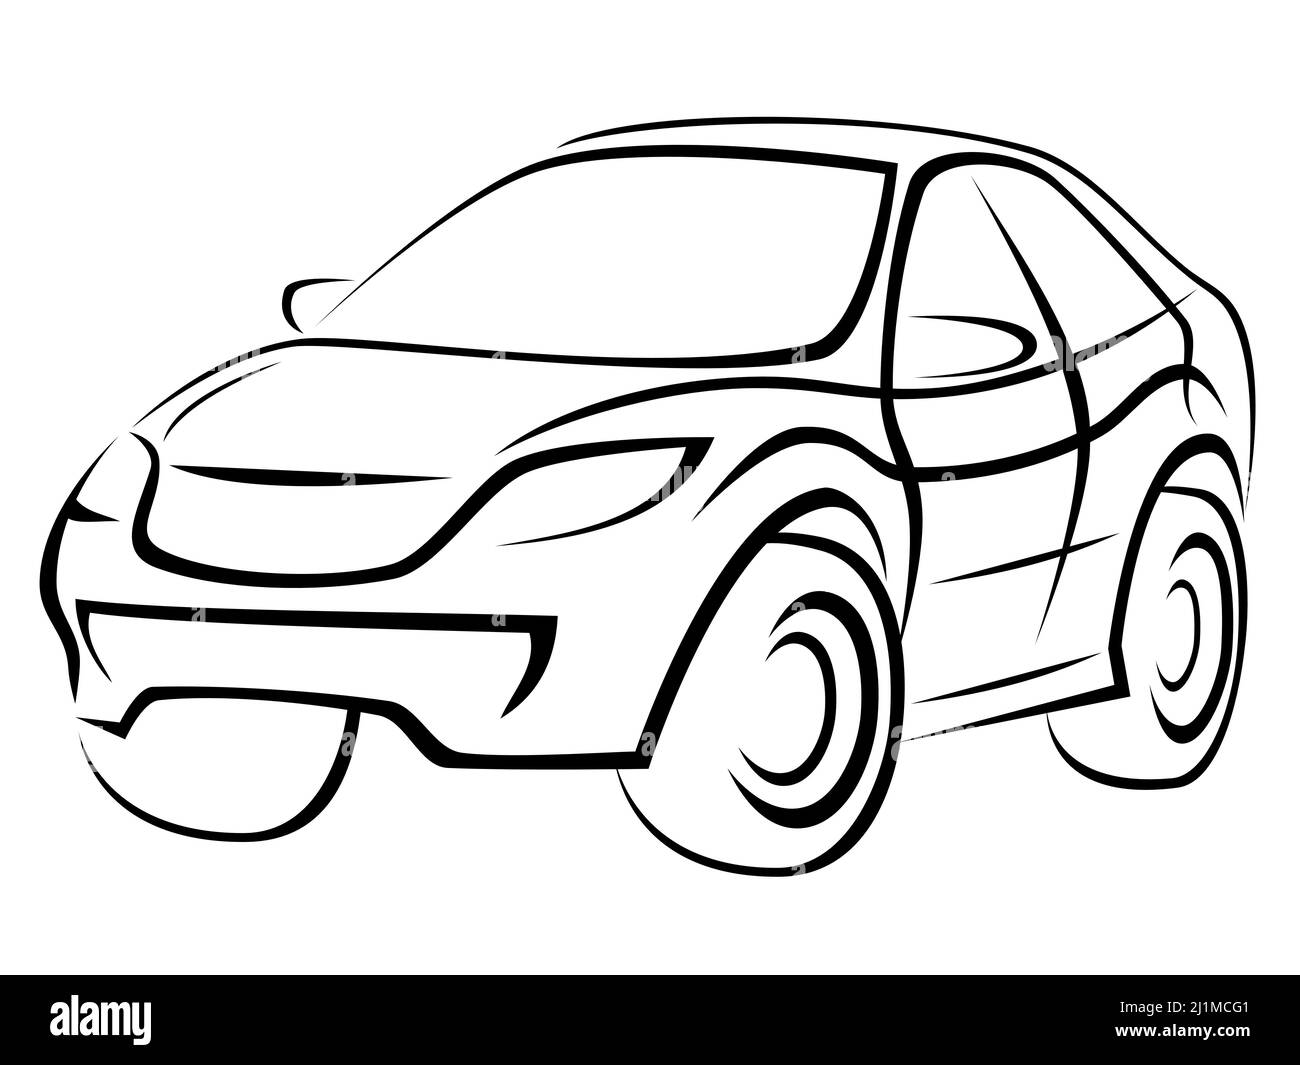 Illustration of a popular SUV car with an aggressive dynamic silhouette Stock Photo